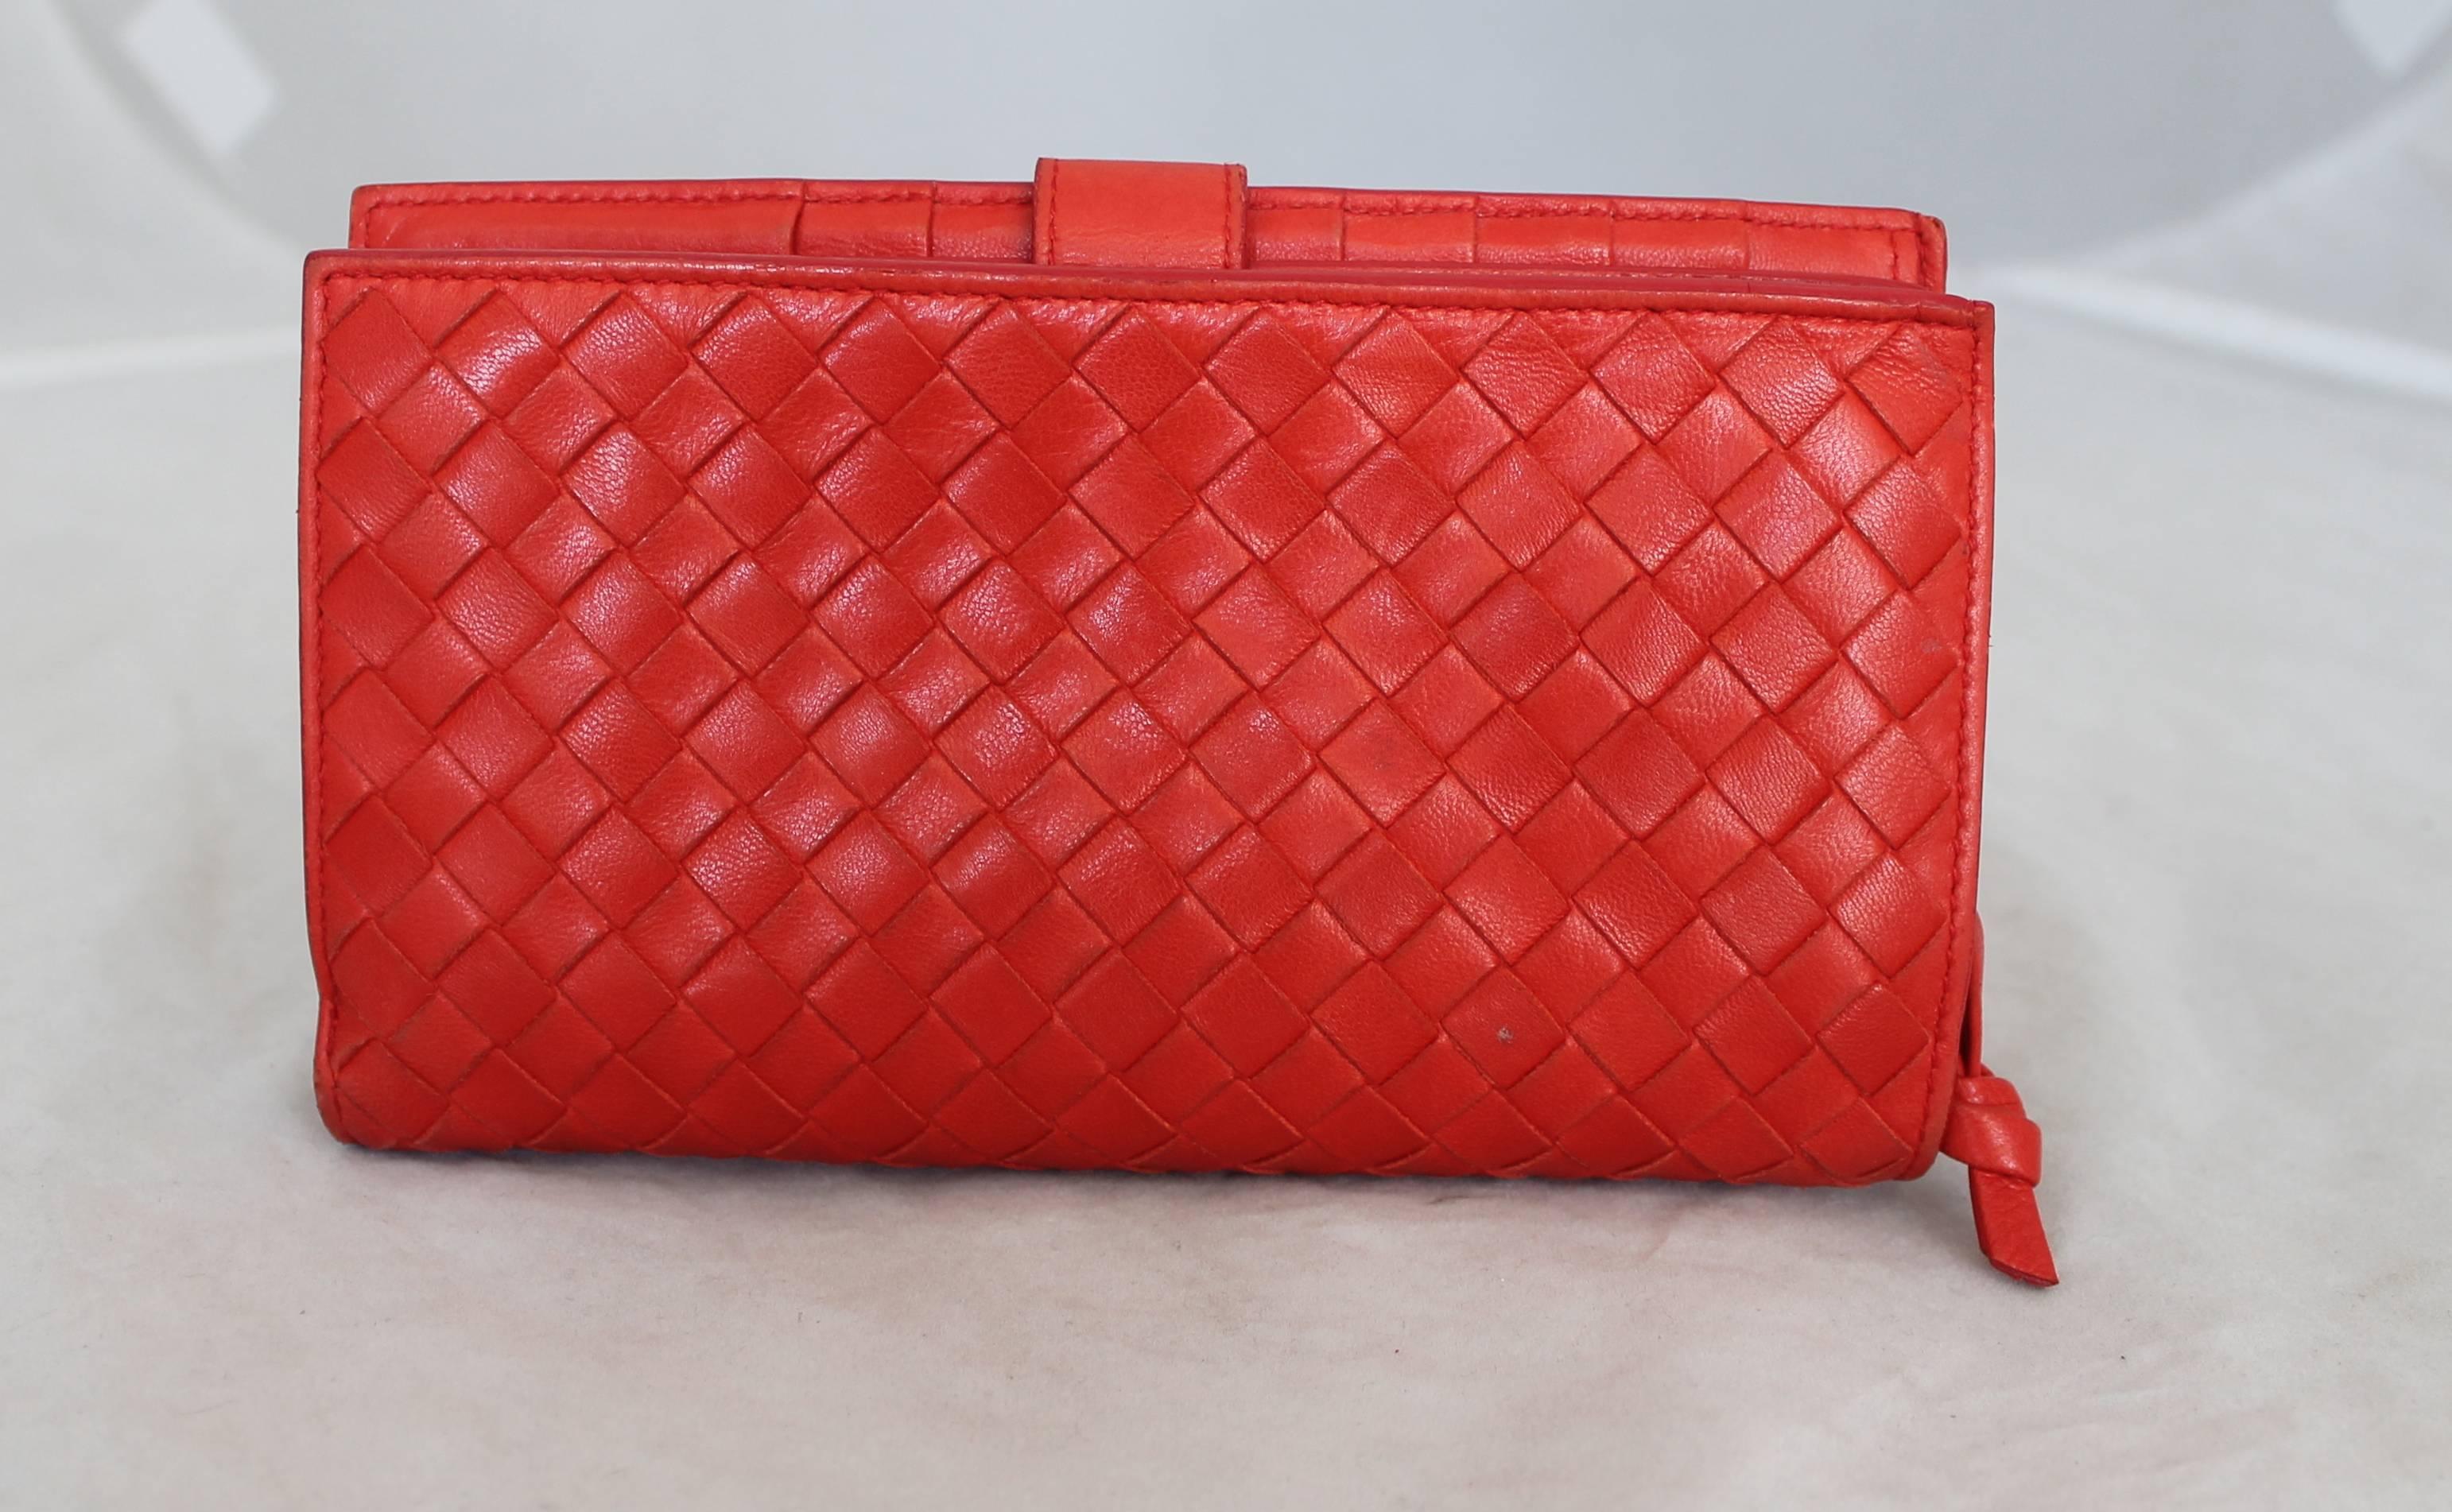 Bottega Veneta Red Woven Leather Wallet.  This wallet is in fair condition; it has wear on the leather and a pen mark on the inside.  It has beautiful, smooth leather woven detail.  The interior contains 8 credit card slits, 3 slit compartments, and